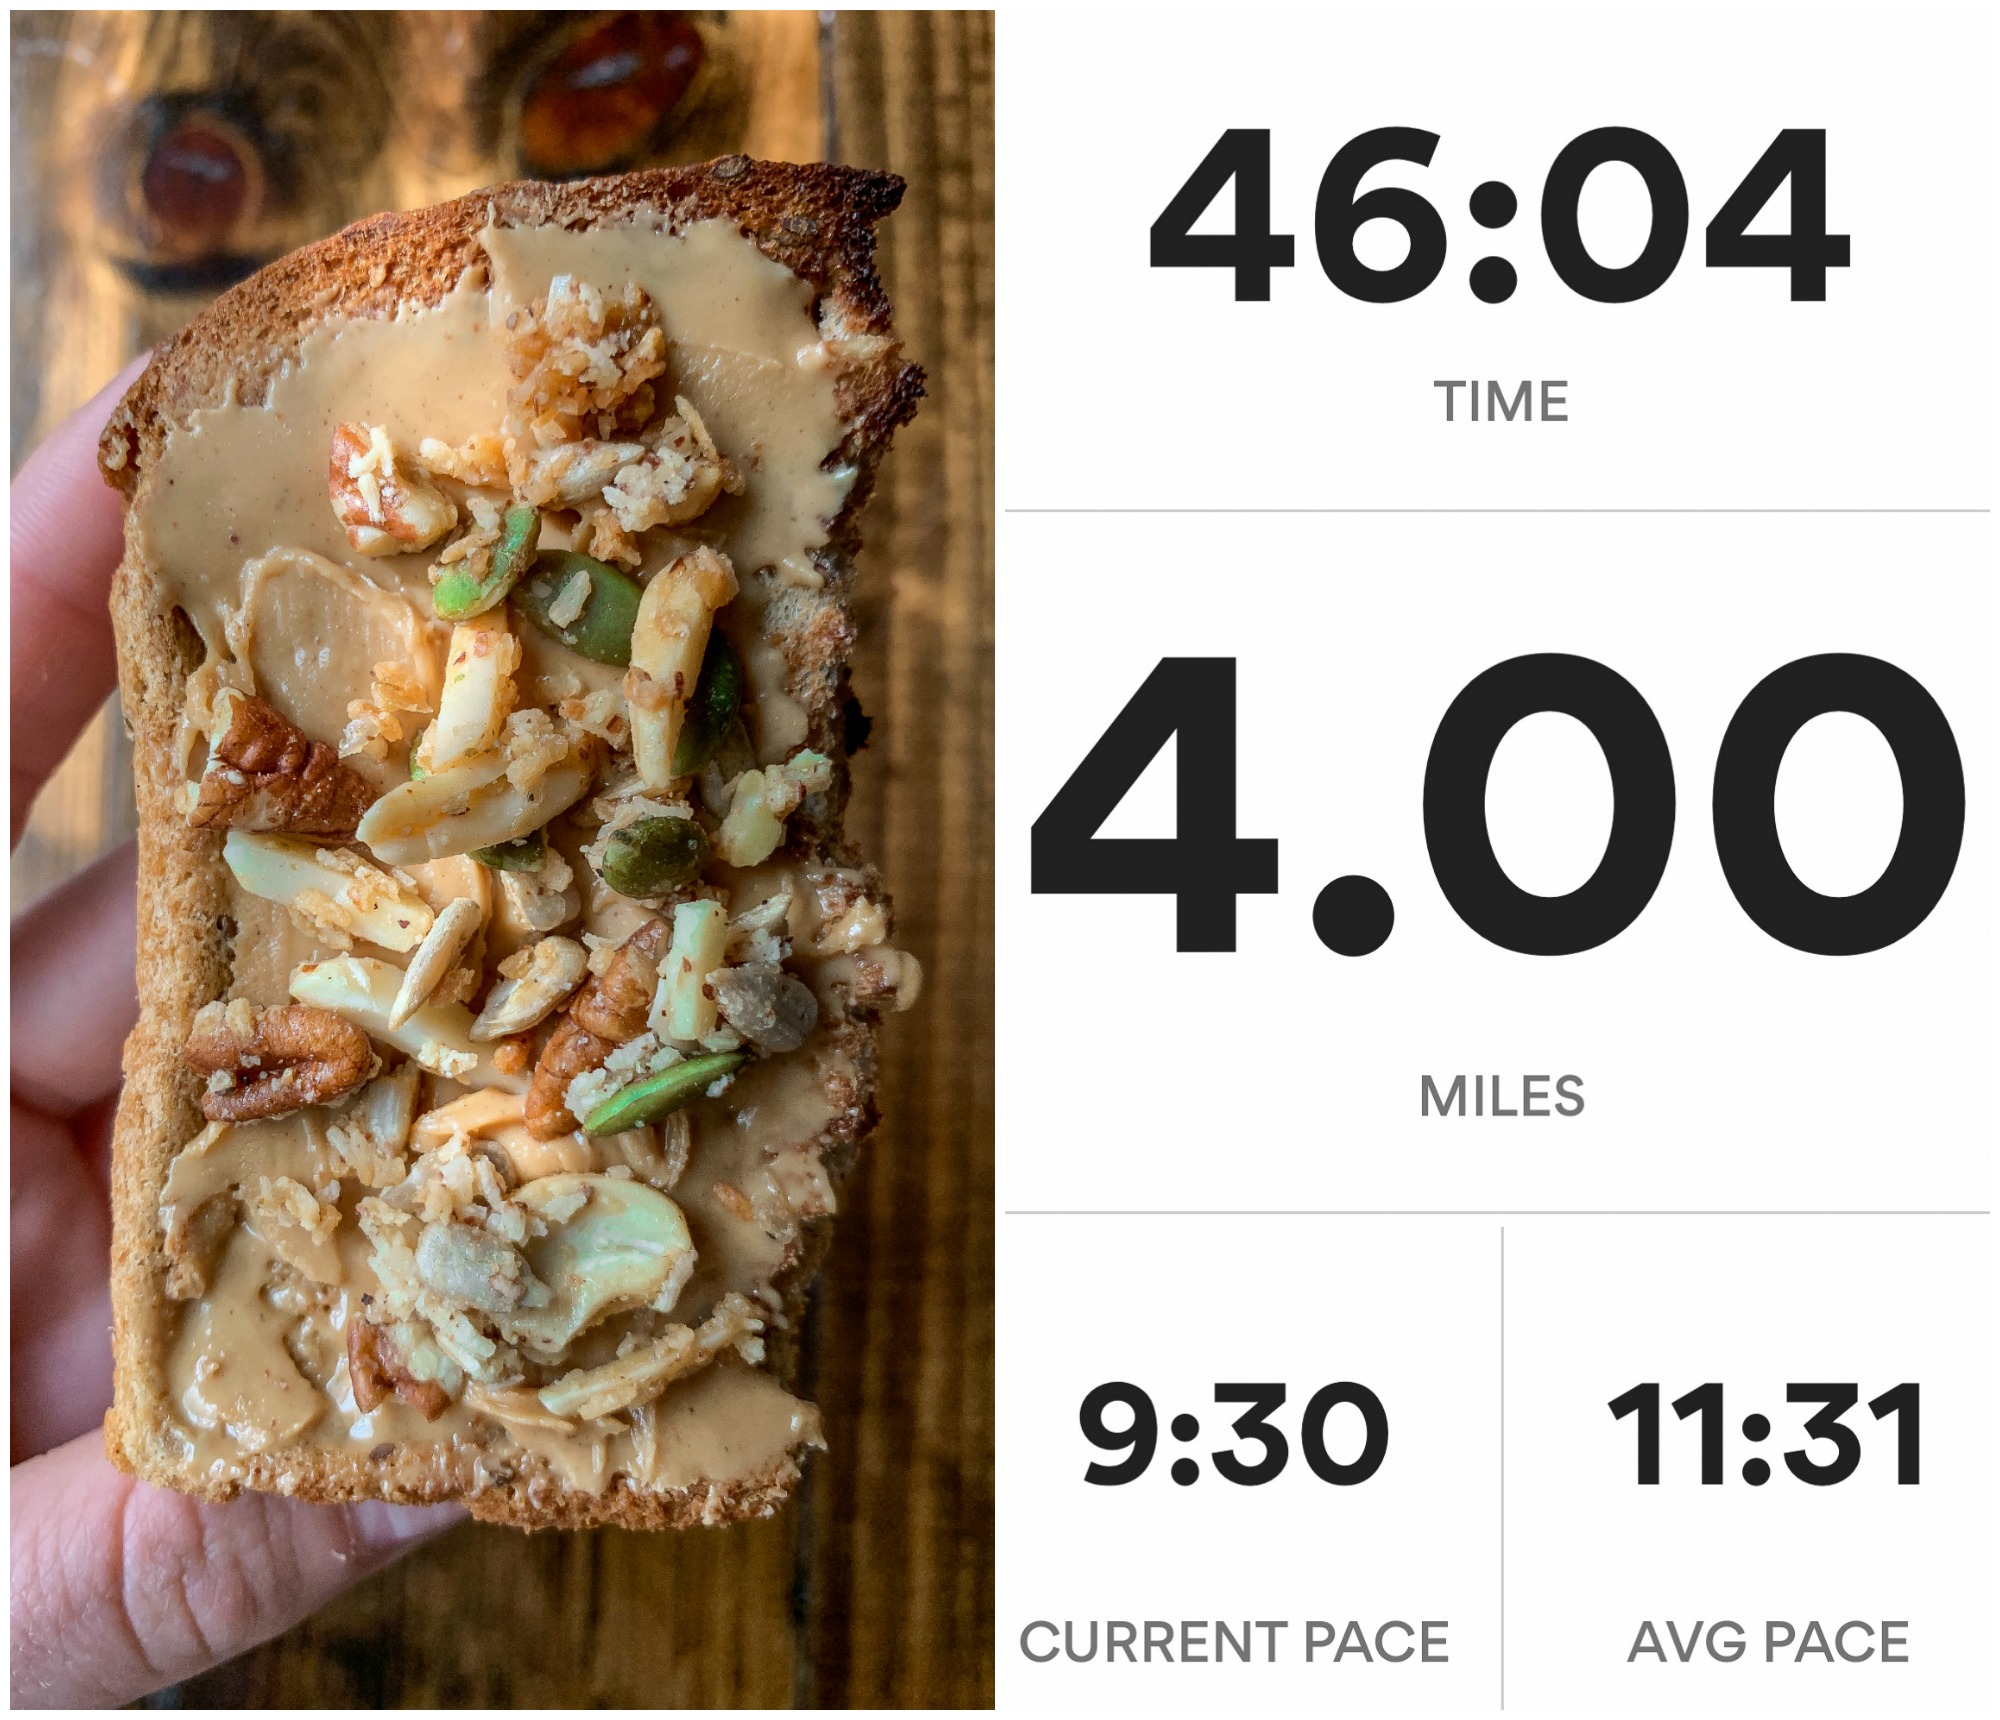 running, hitting four miles, five miles, fun , love life, be happy, pre run workout training peanut butter healthy food gluten free